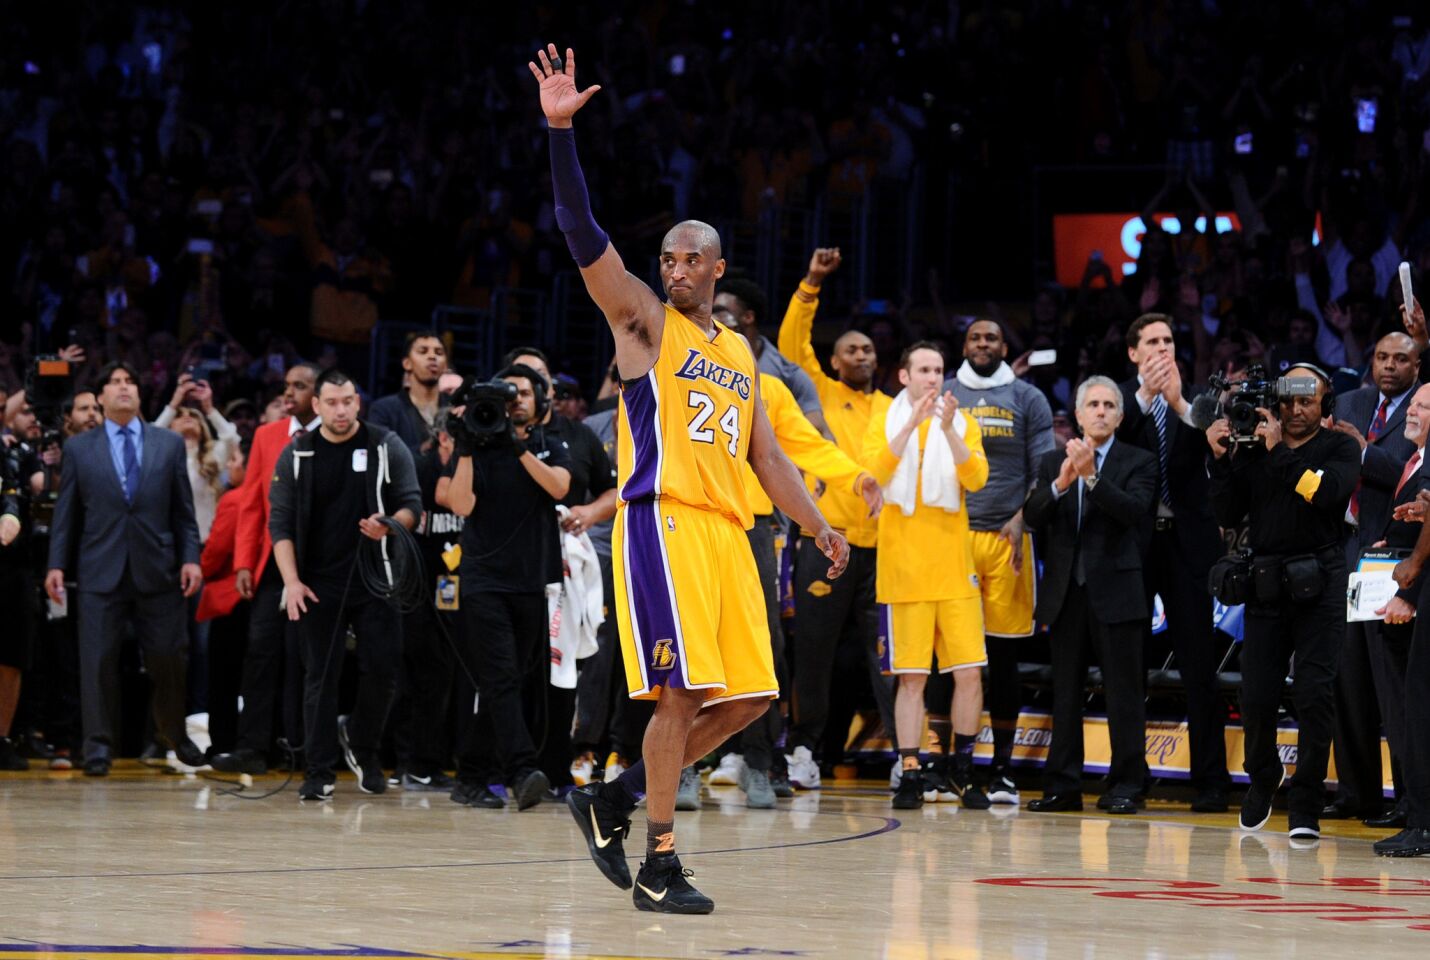 Kobe Bryant waves to the crowd as he walks off the court for the last time at Staples Center.